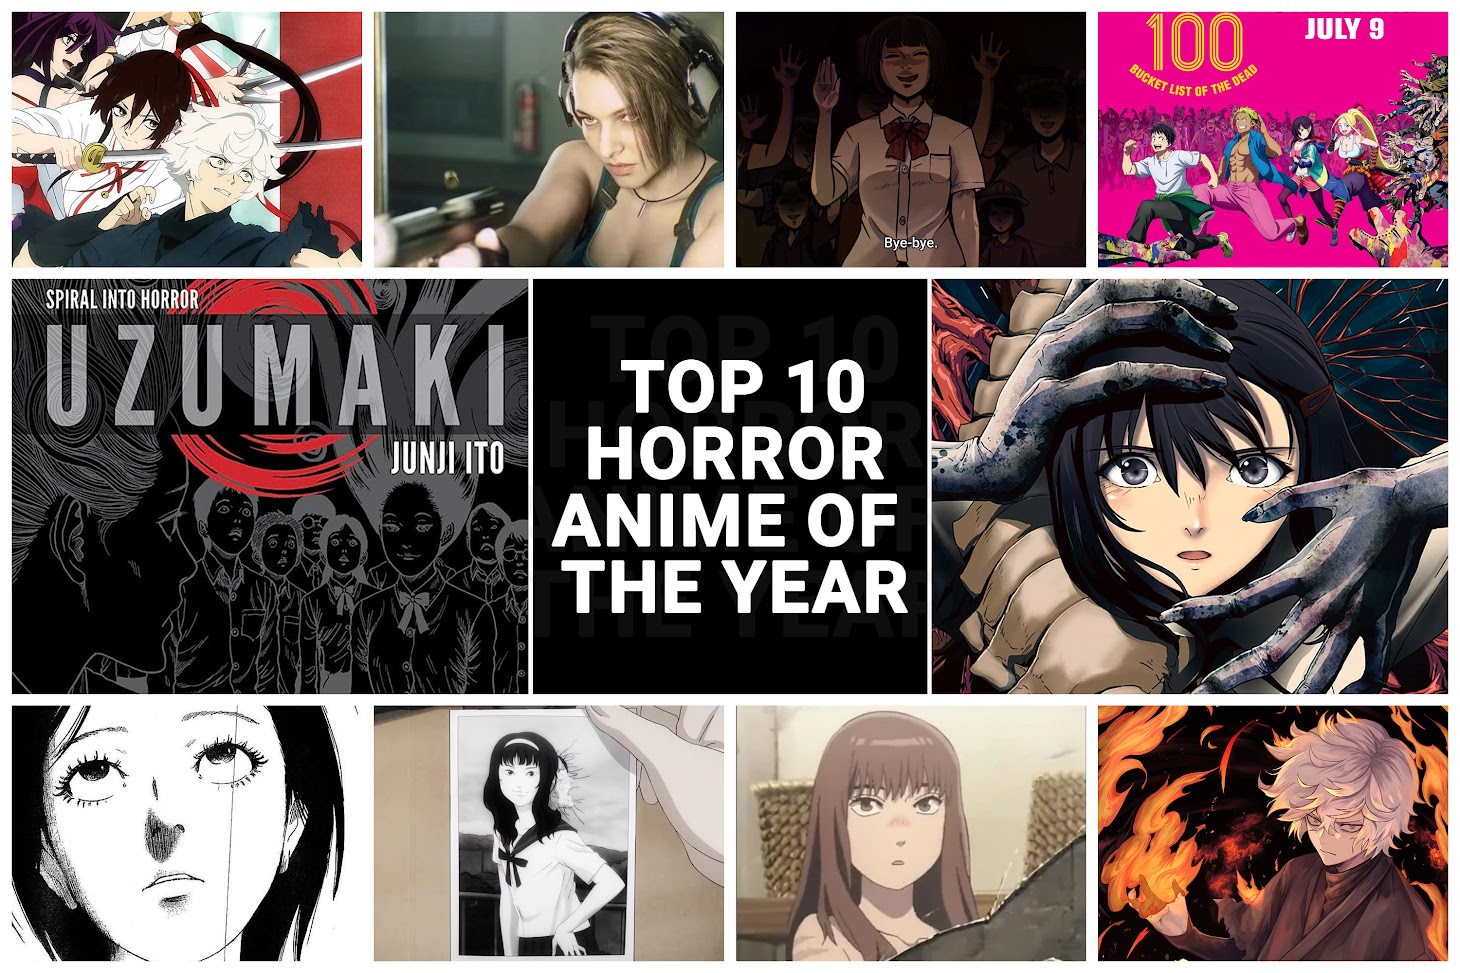 Top 10 Horror Anime of the Year to Get Spooked